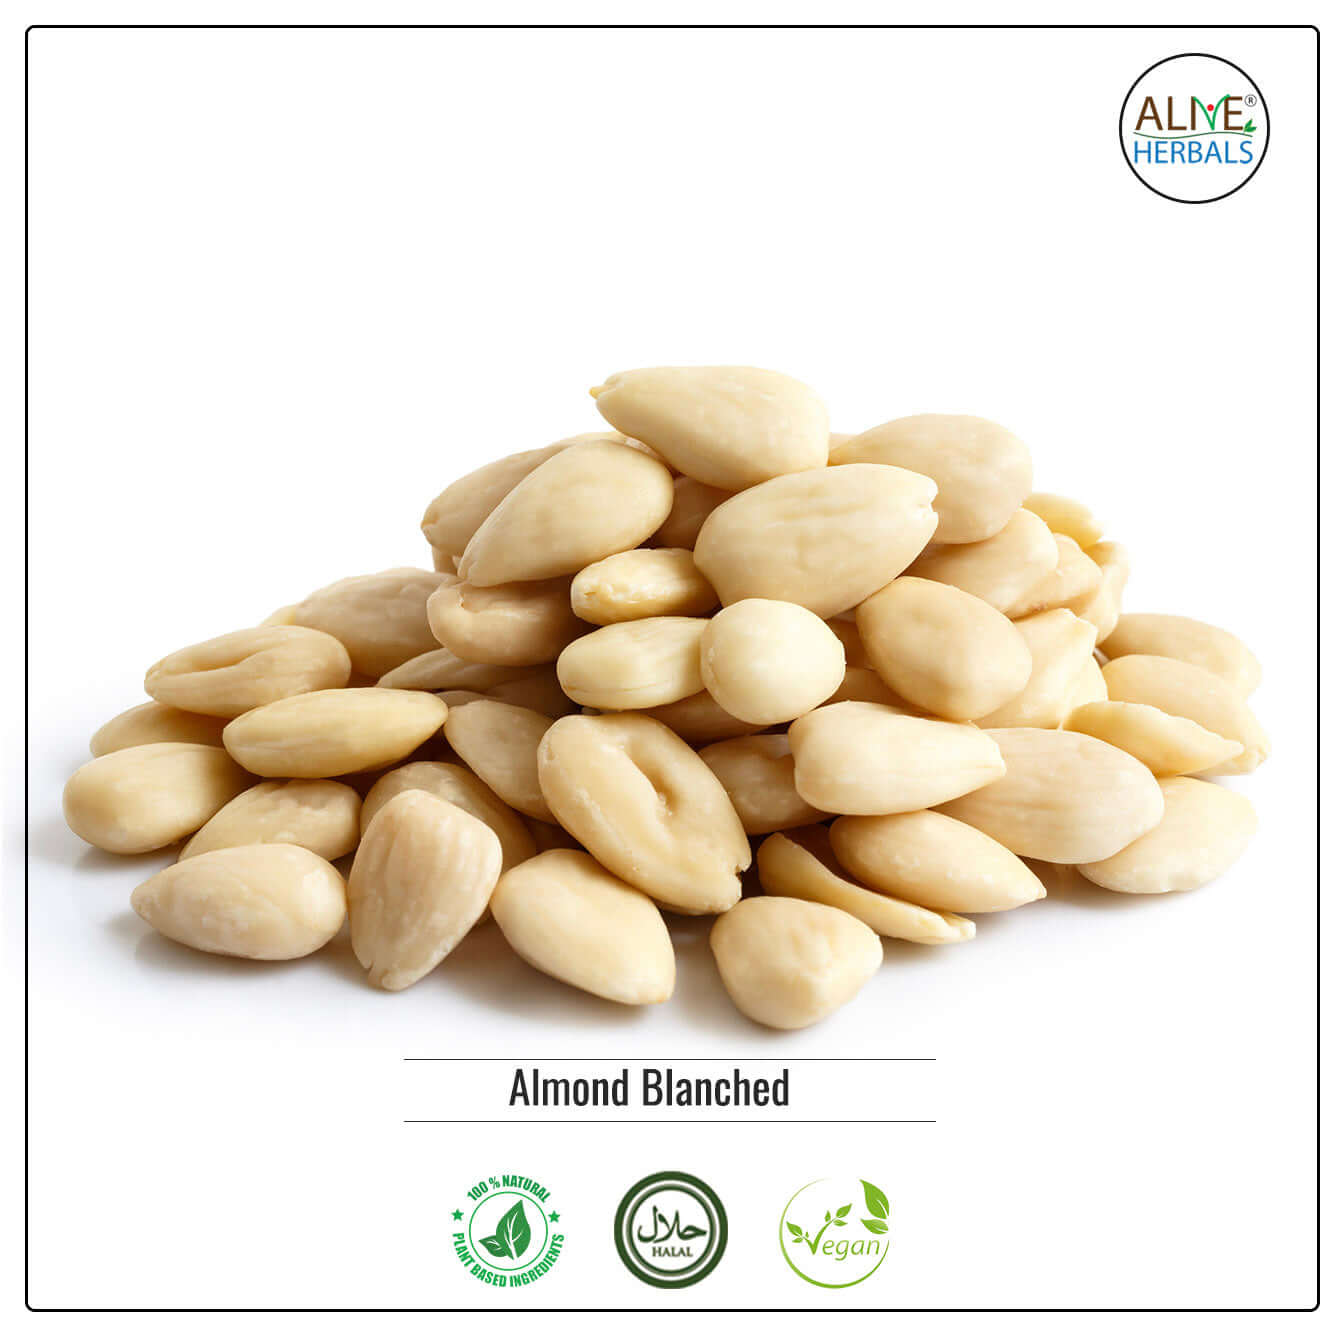 Whole Blanched Almonds - But at the natural foods store in the USA - Alive herbal